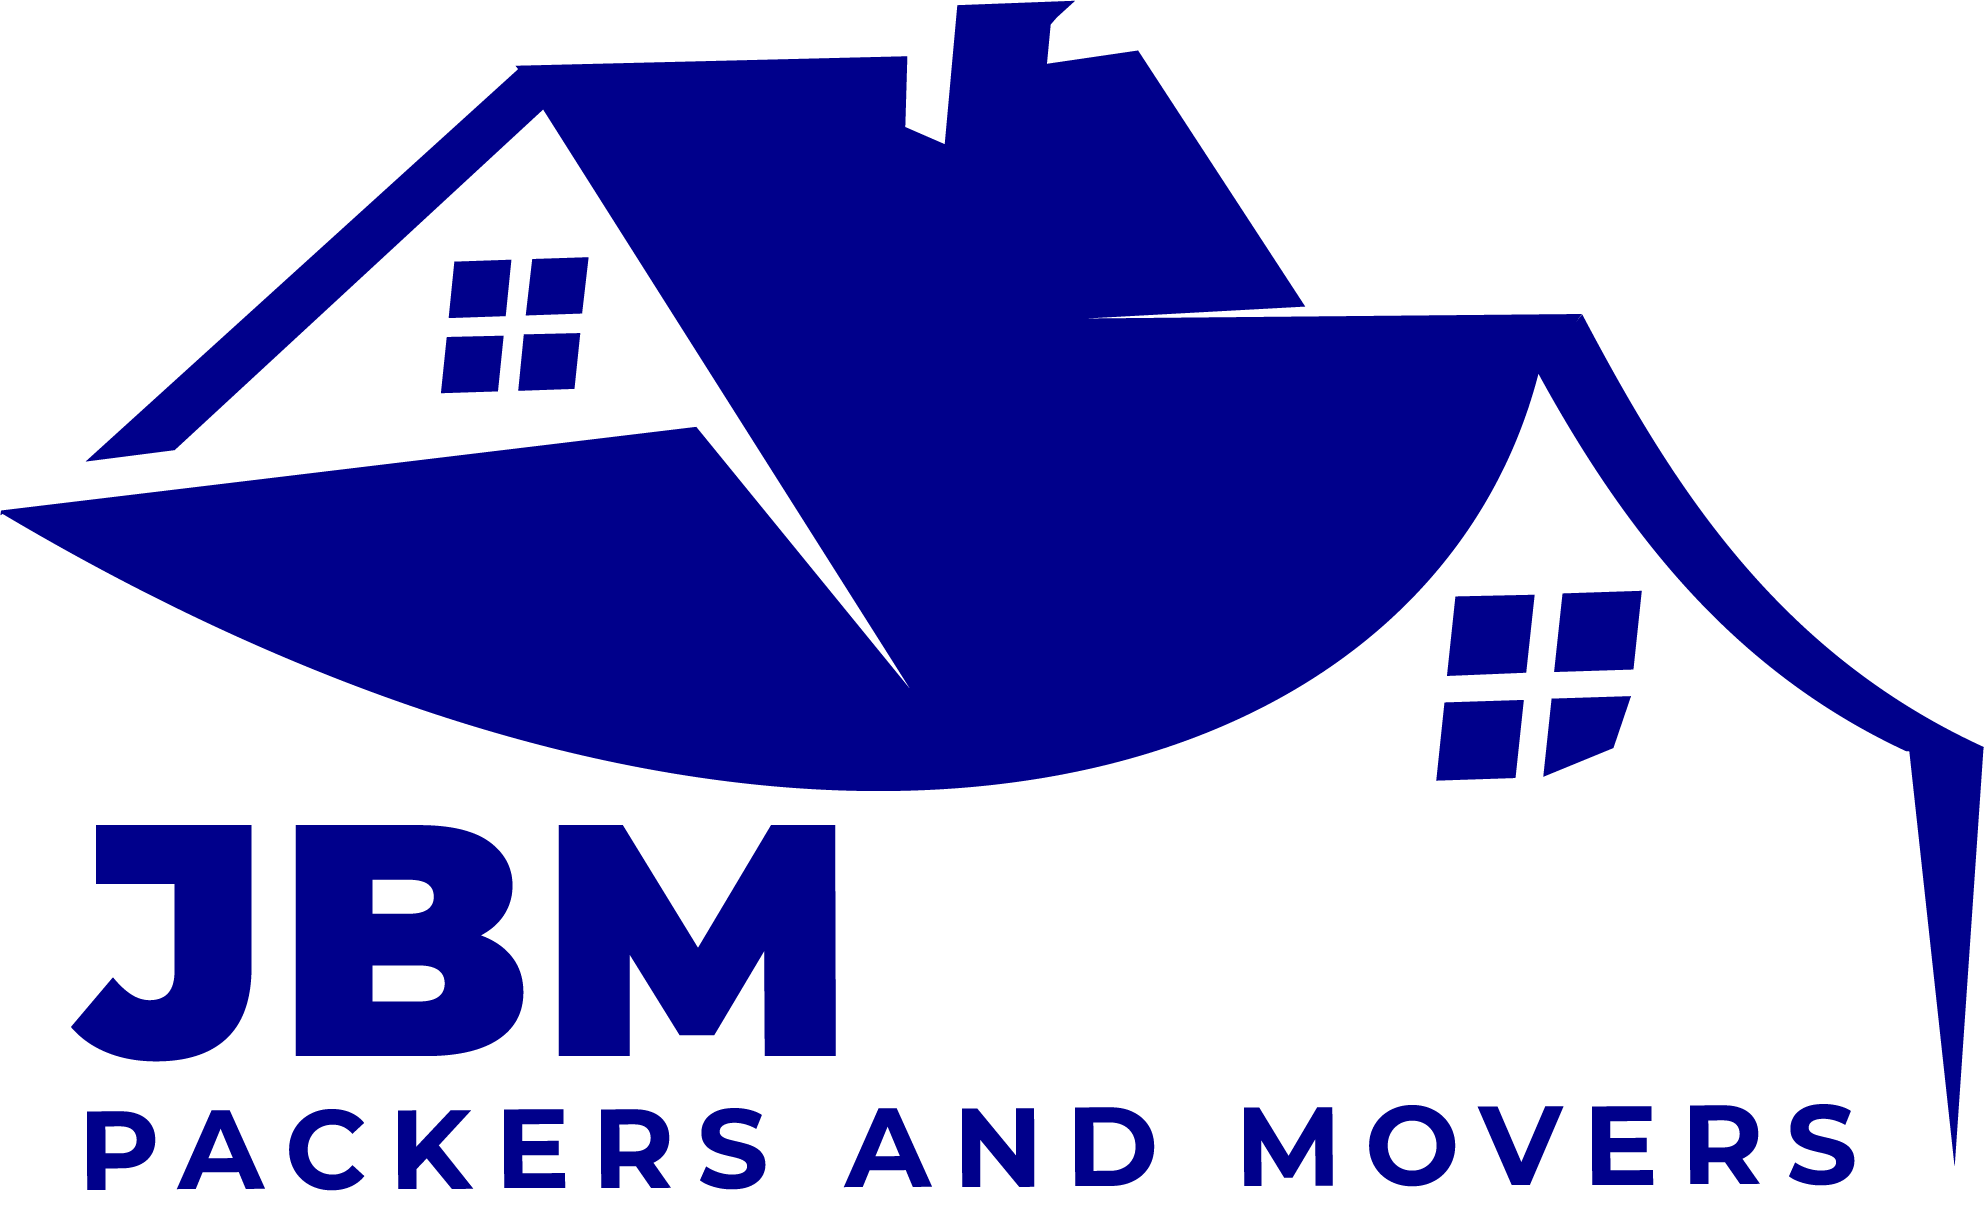 About us - MTR Packers and Movers Bangalore